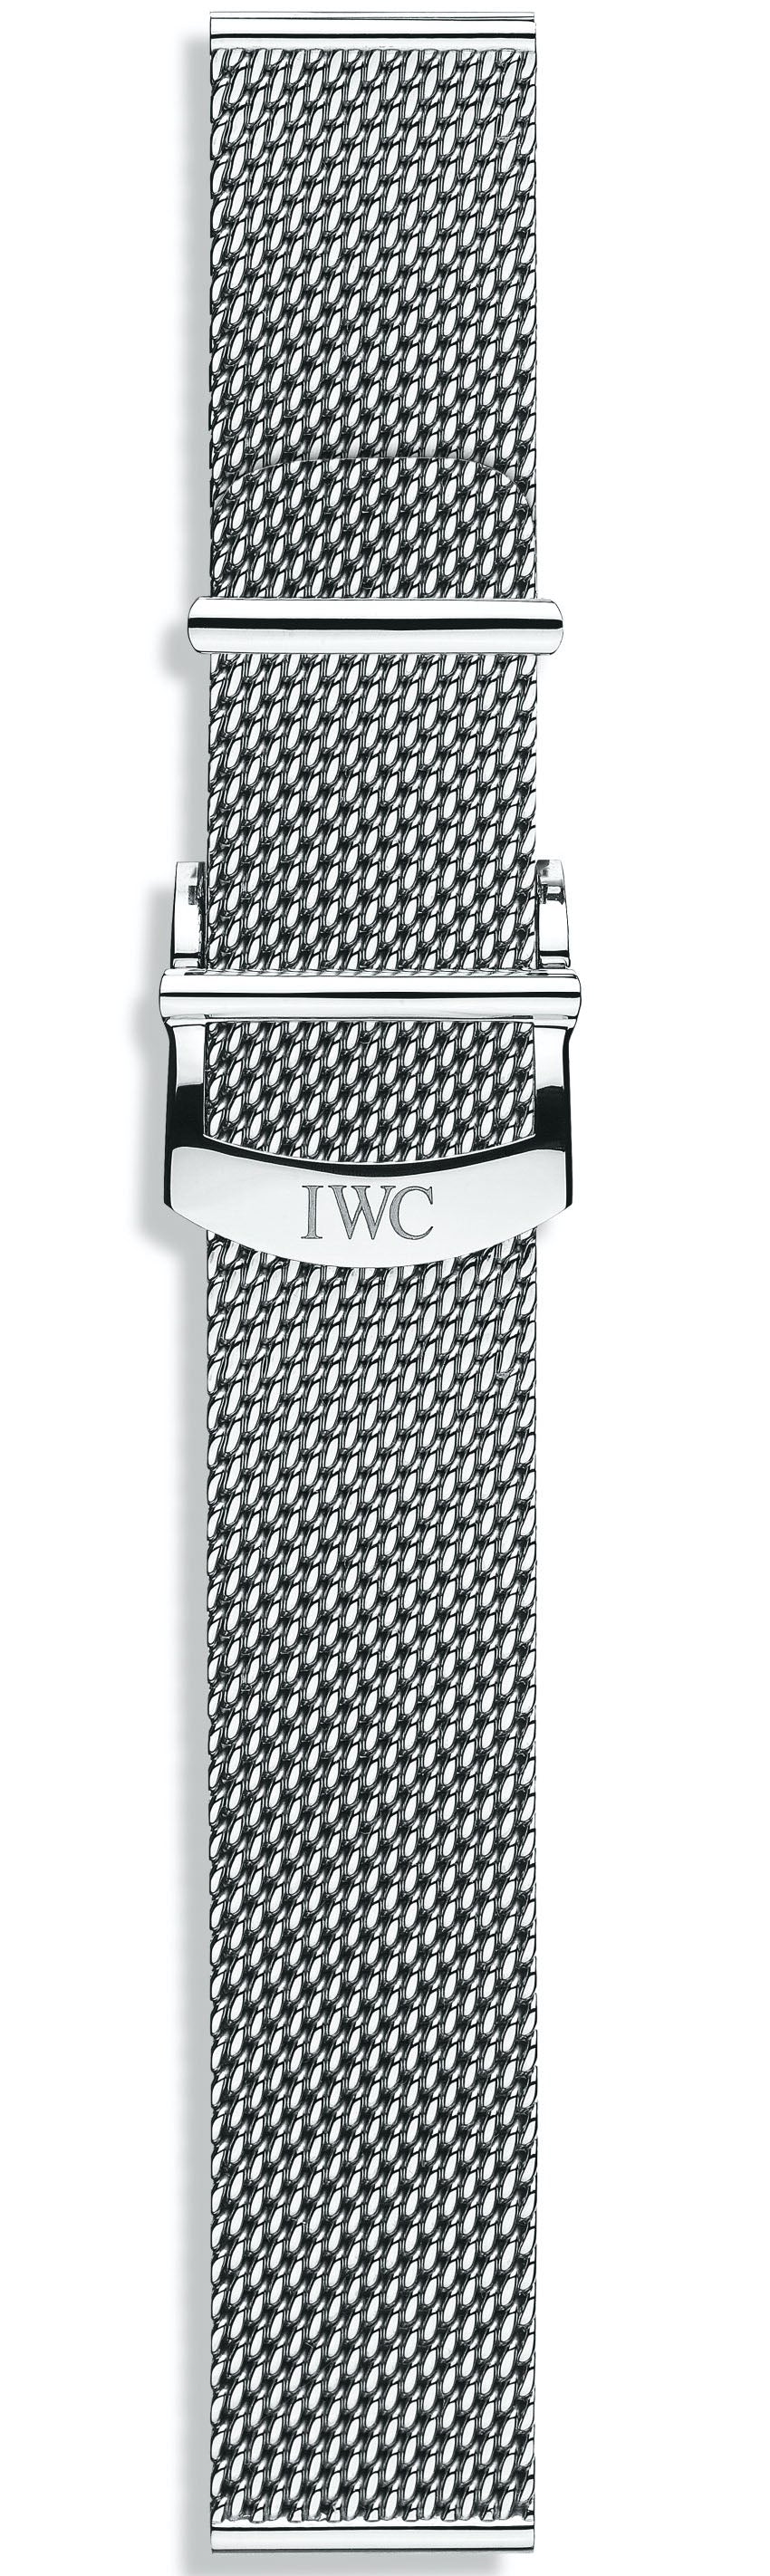 Photos - Watch Strap IWC Strap Bracelet Milanese Steel With Clasp - Silver -S-105 